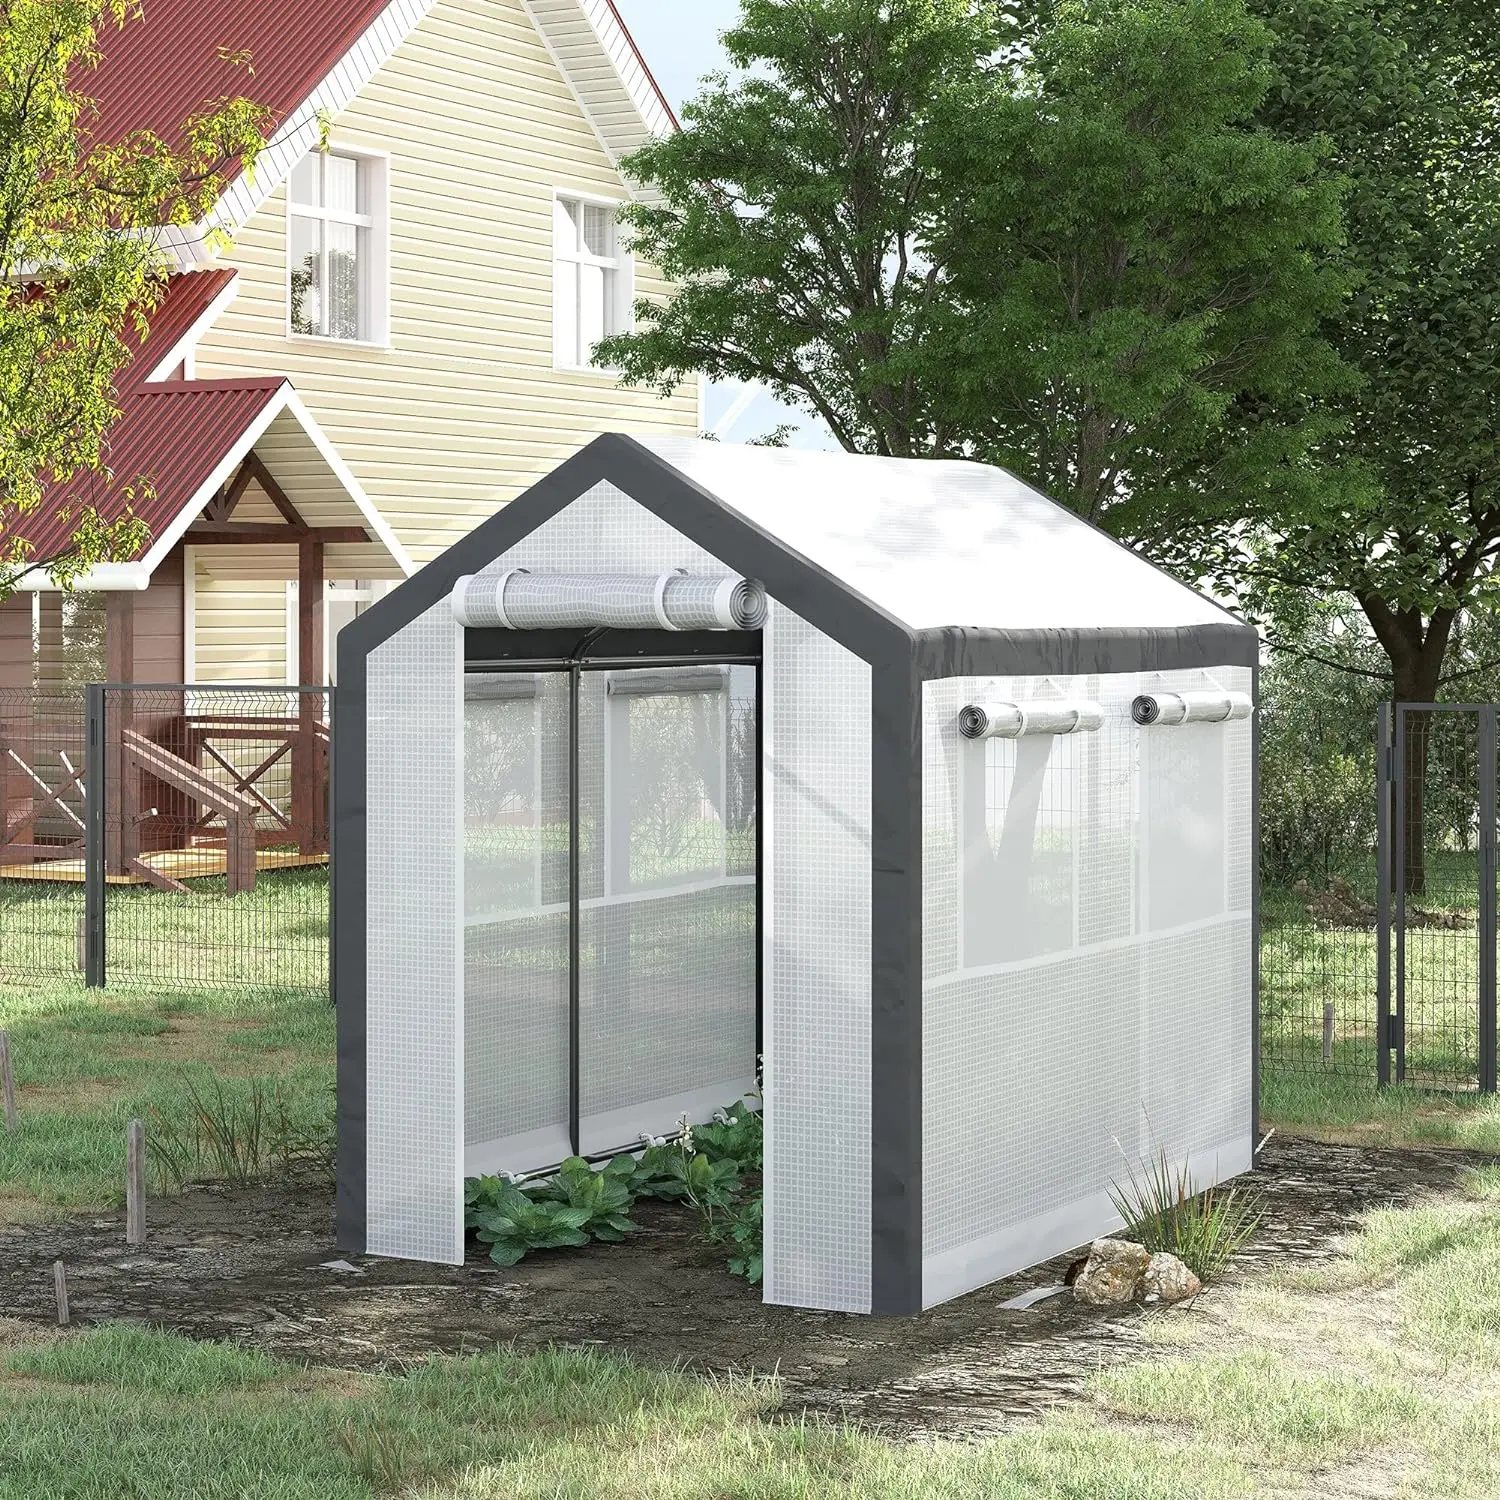 

8' x 6' x 7.5' Walk-in Greenhouse, Outdoor Gardening Canopy with 6 Roll-up Windows, 2 Zippered Doors & Weather Cover, White